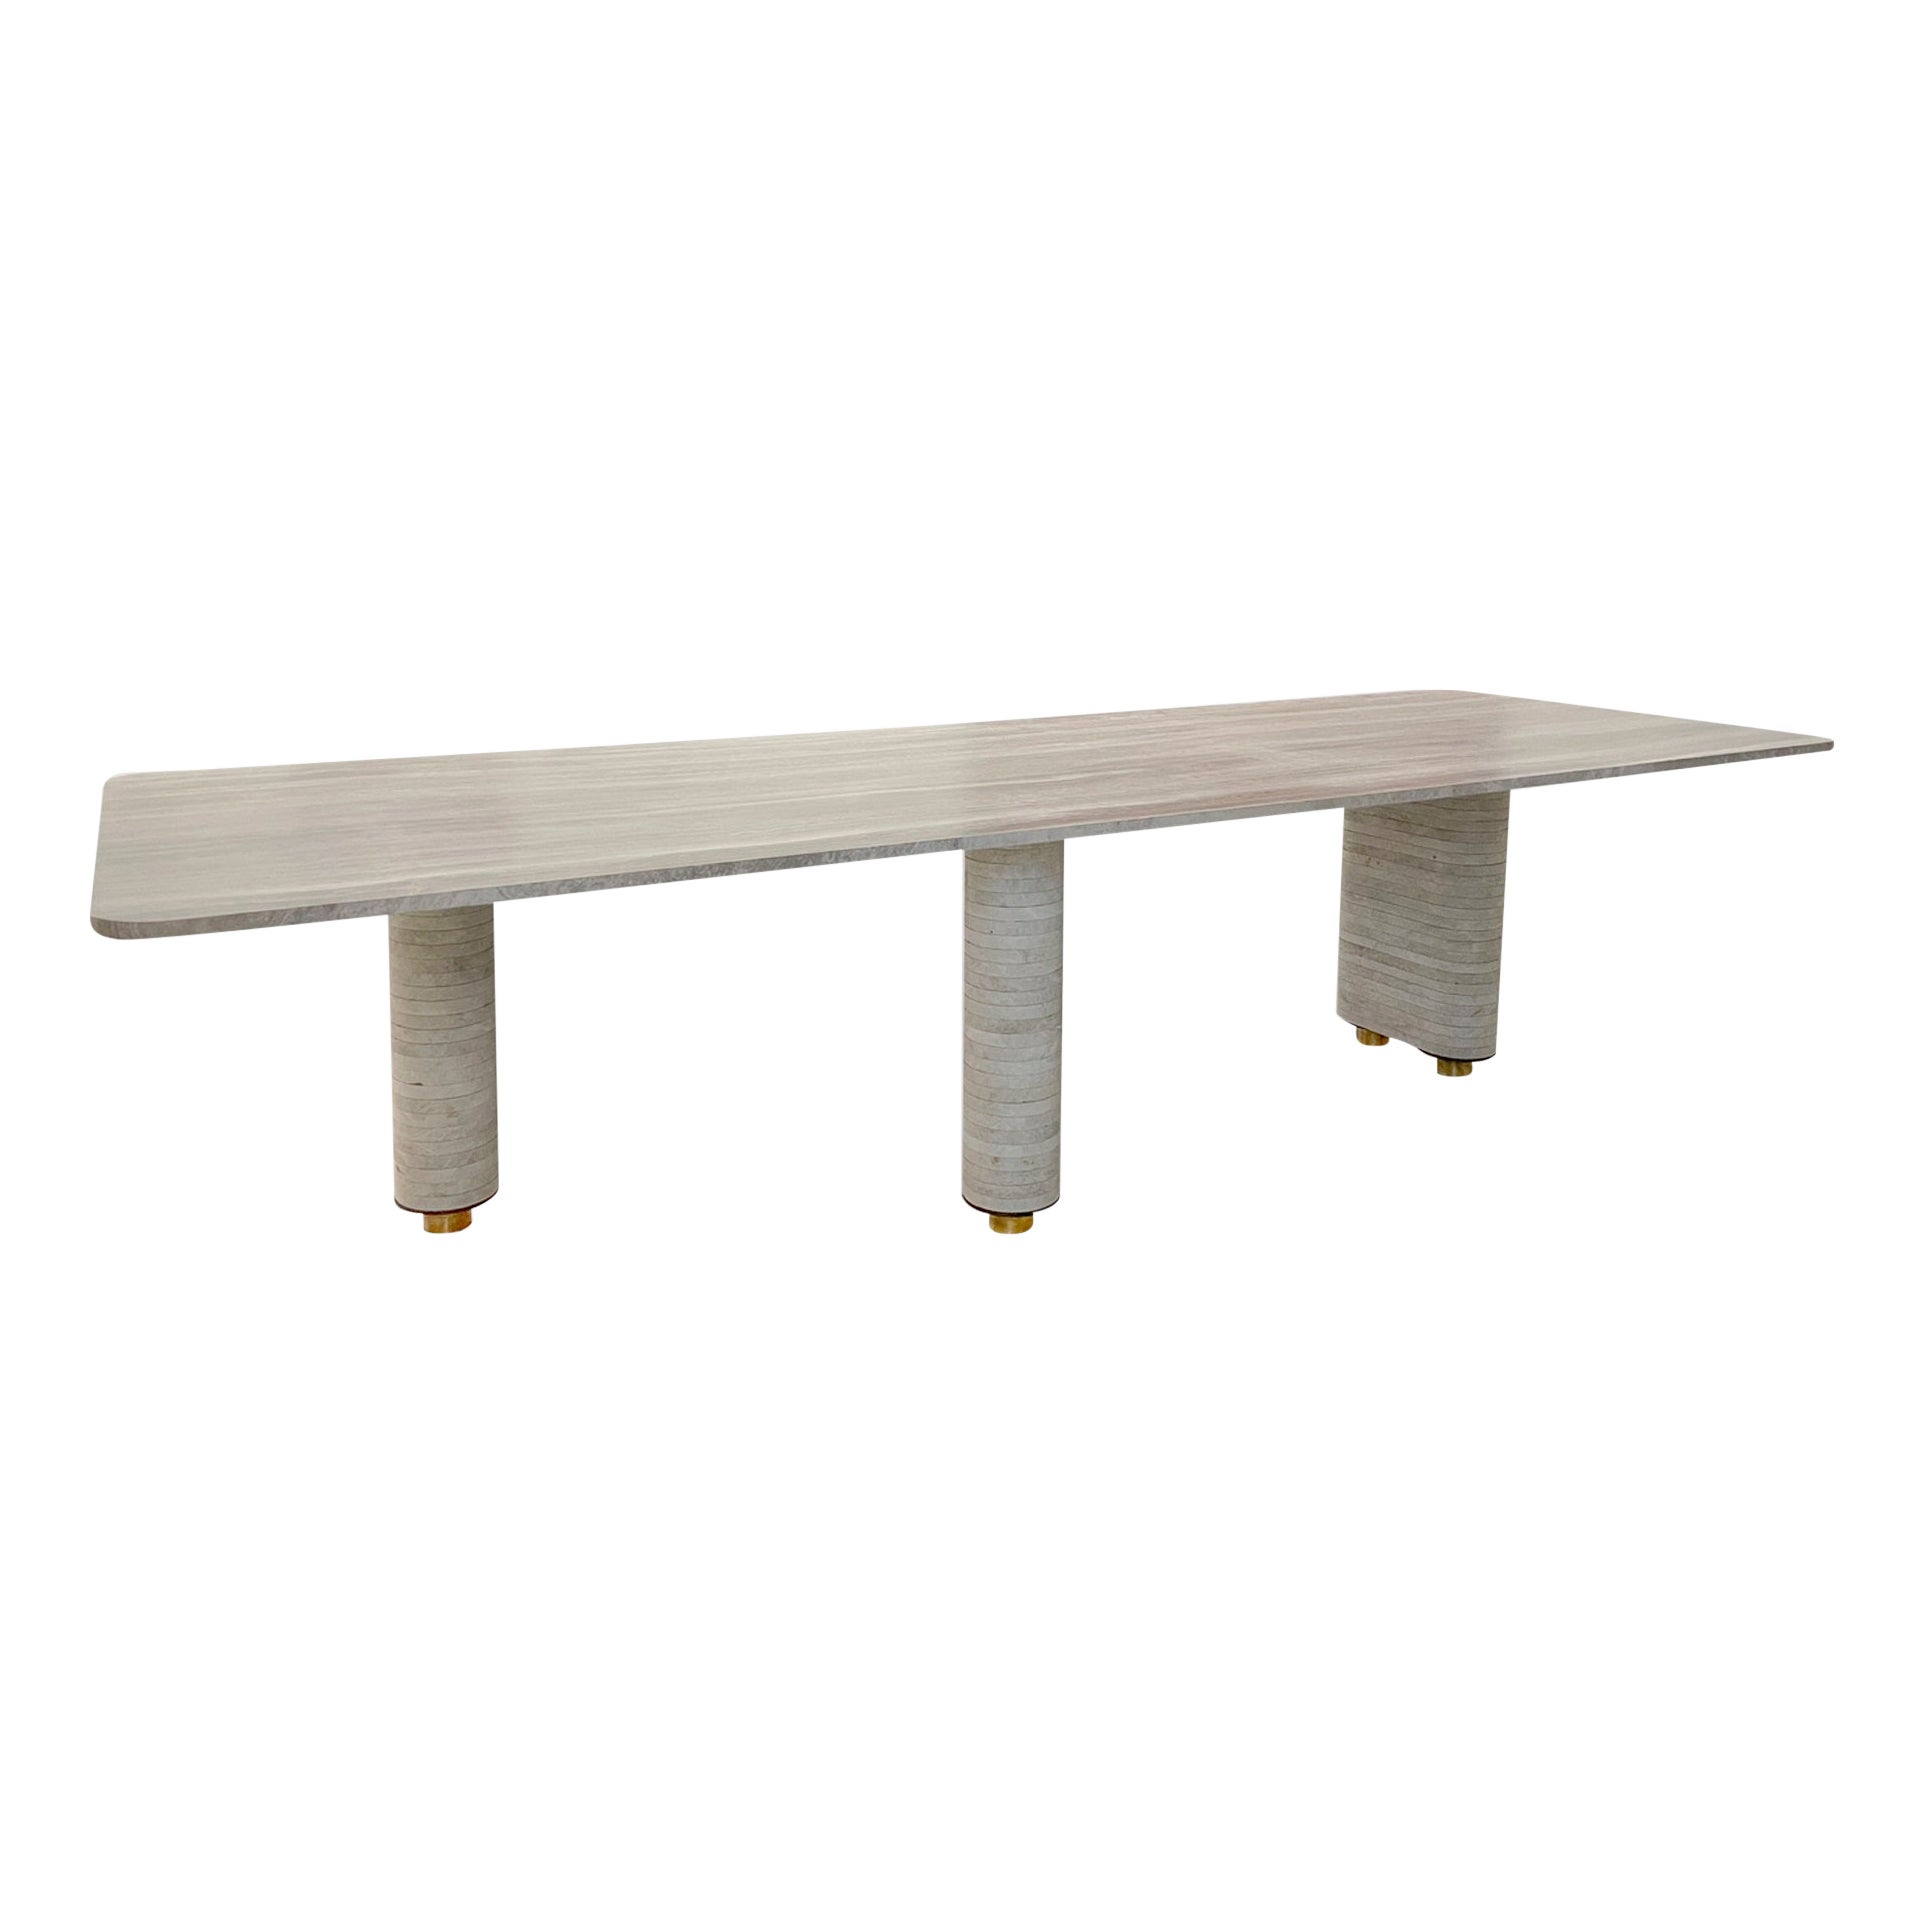 Silver Travertine With Wood Top Aro Dining Table by Atra Design For Sale